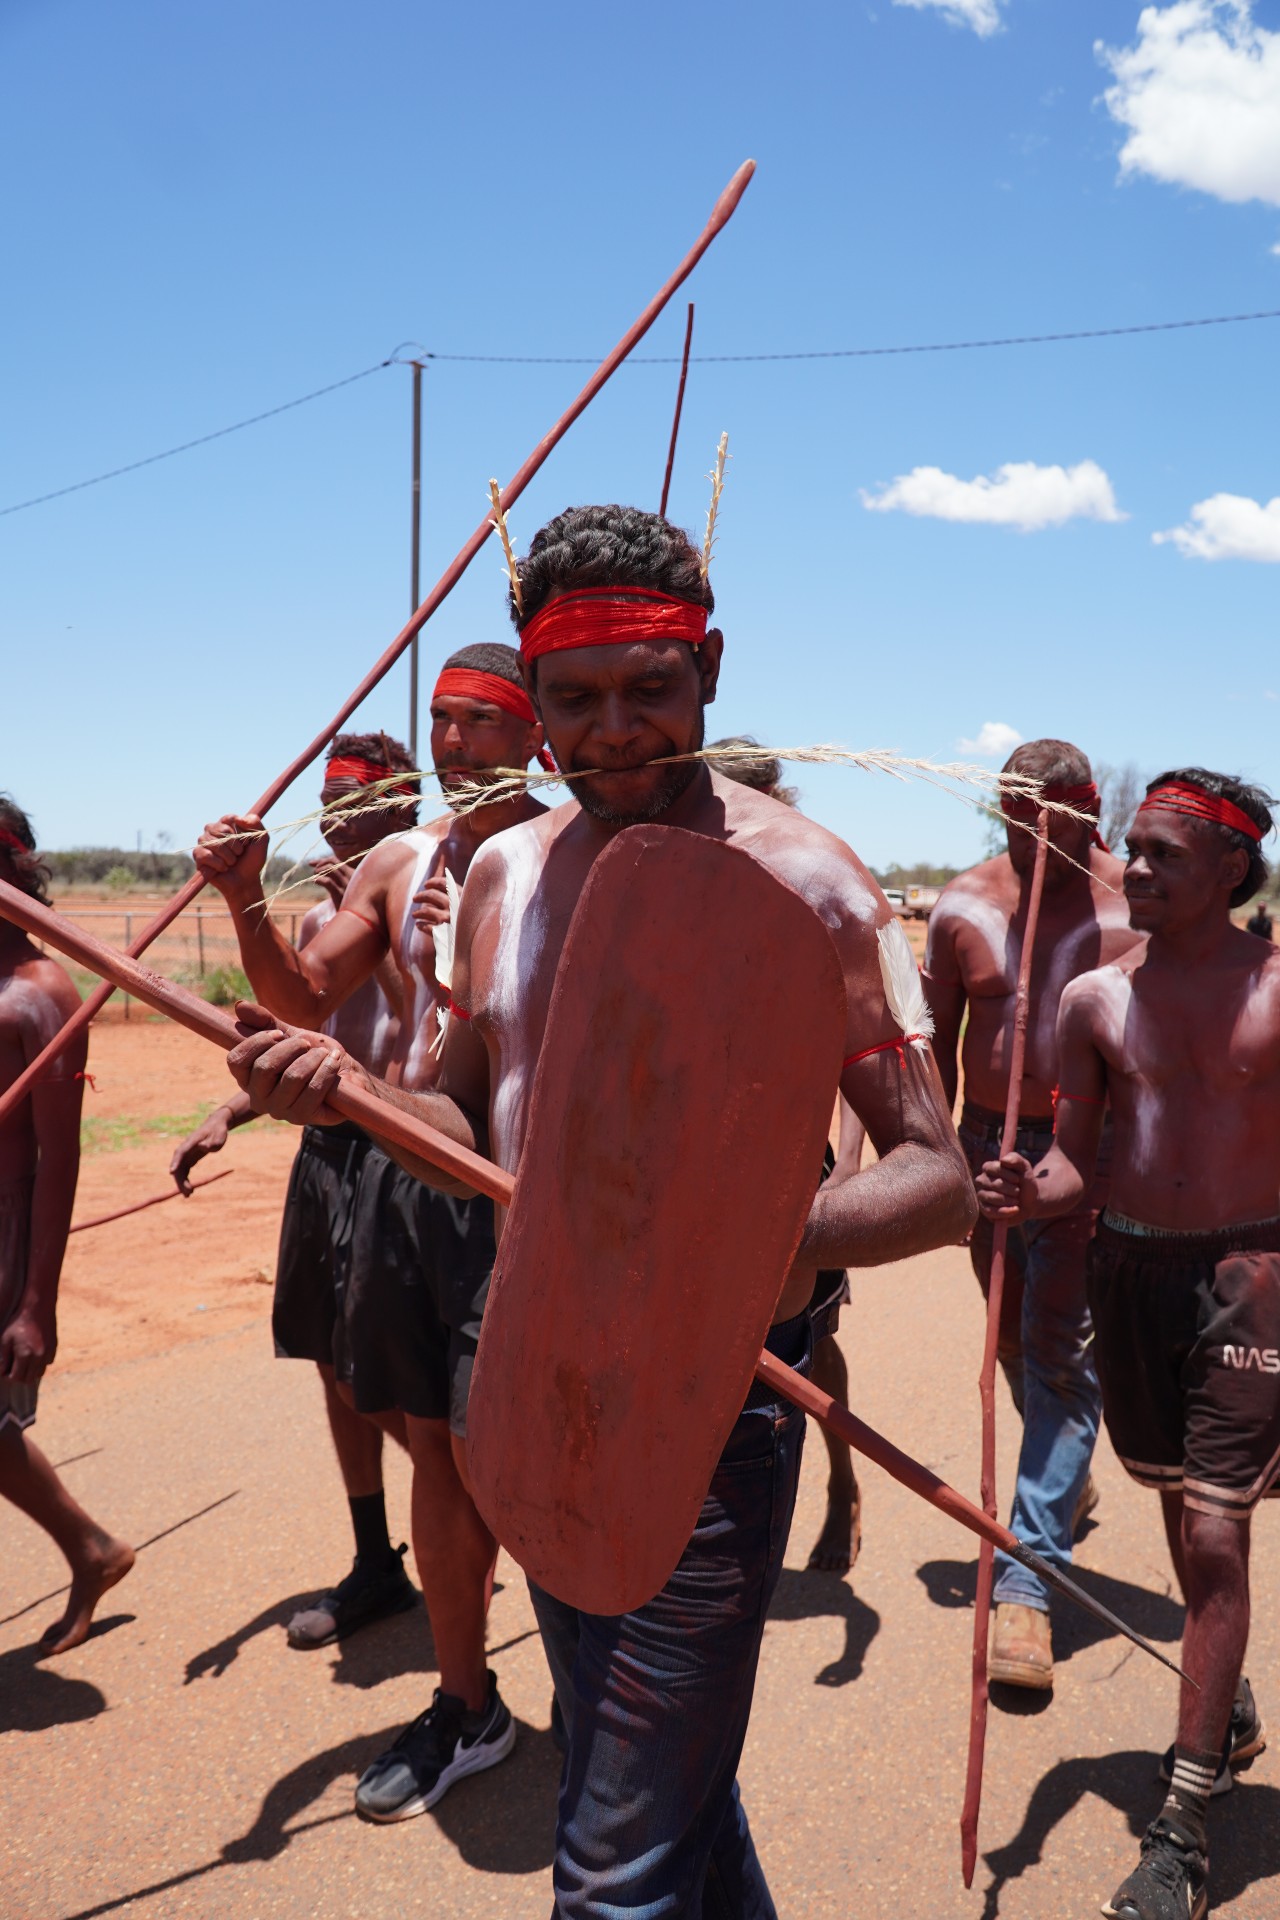 Aboriginal men wearing red headband and spears and sheild stand together 